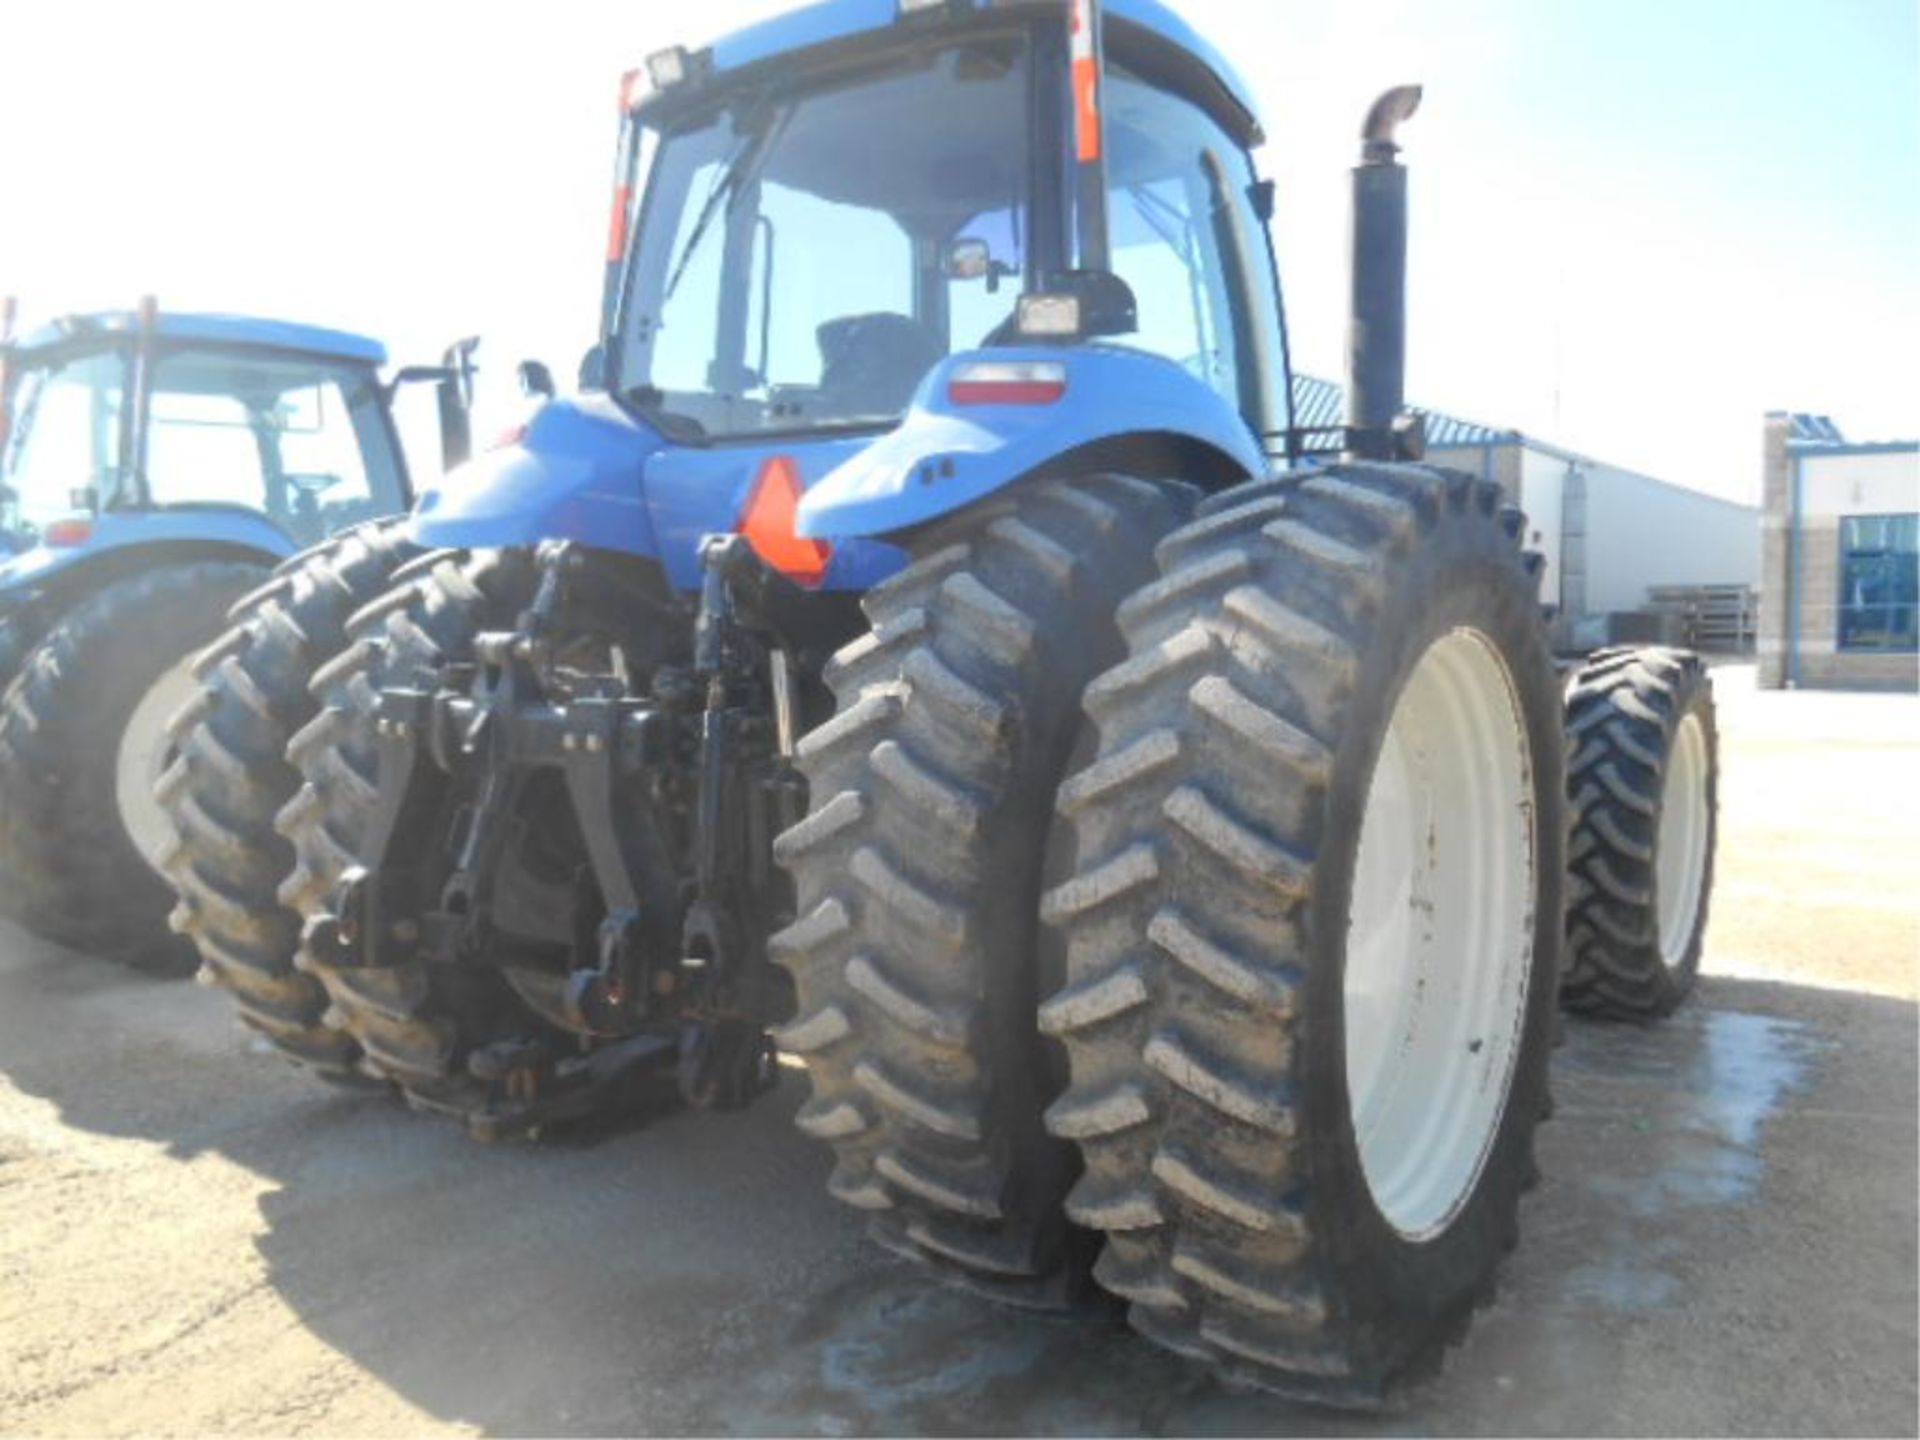 New Holland T8020 Tractor '09, sn#Z8RW02210 5630 Hrs, MFWD, Fully Equipped Cab, Buddy Seat, 278 - Image 3 of 11